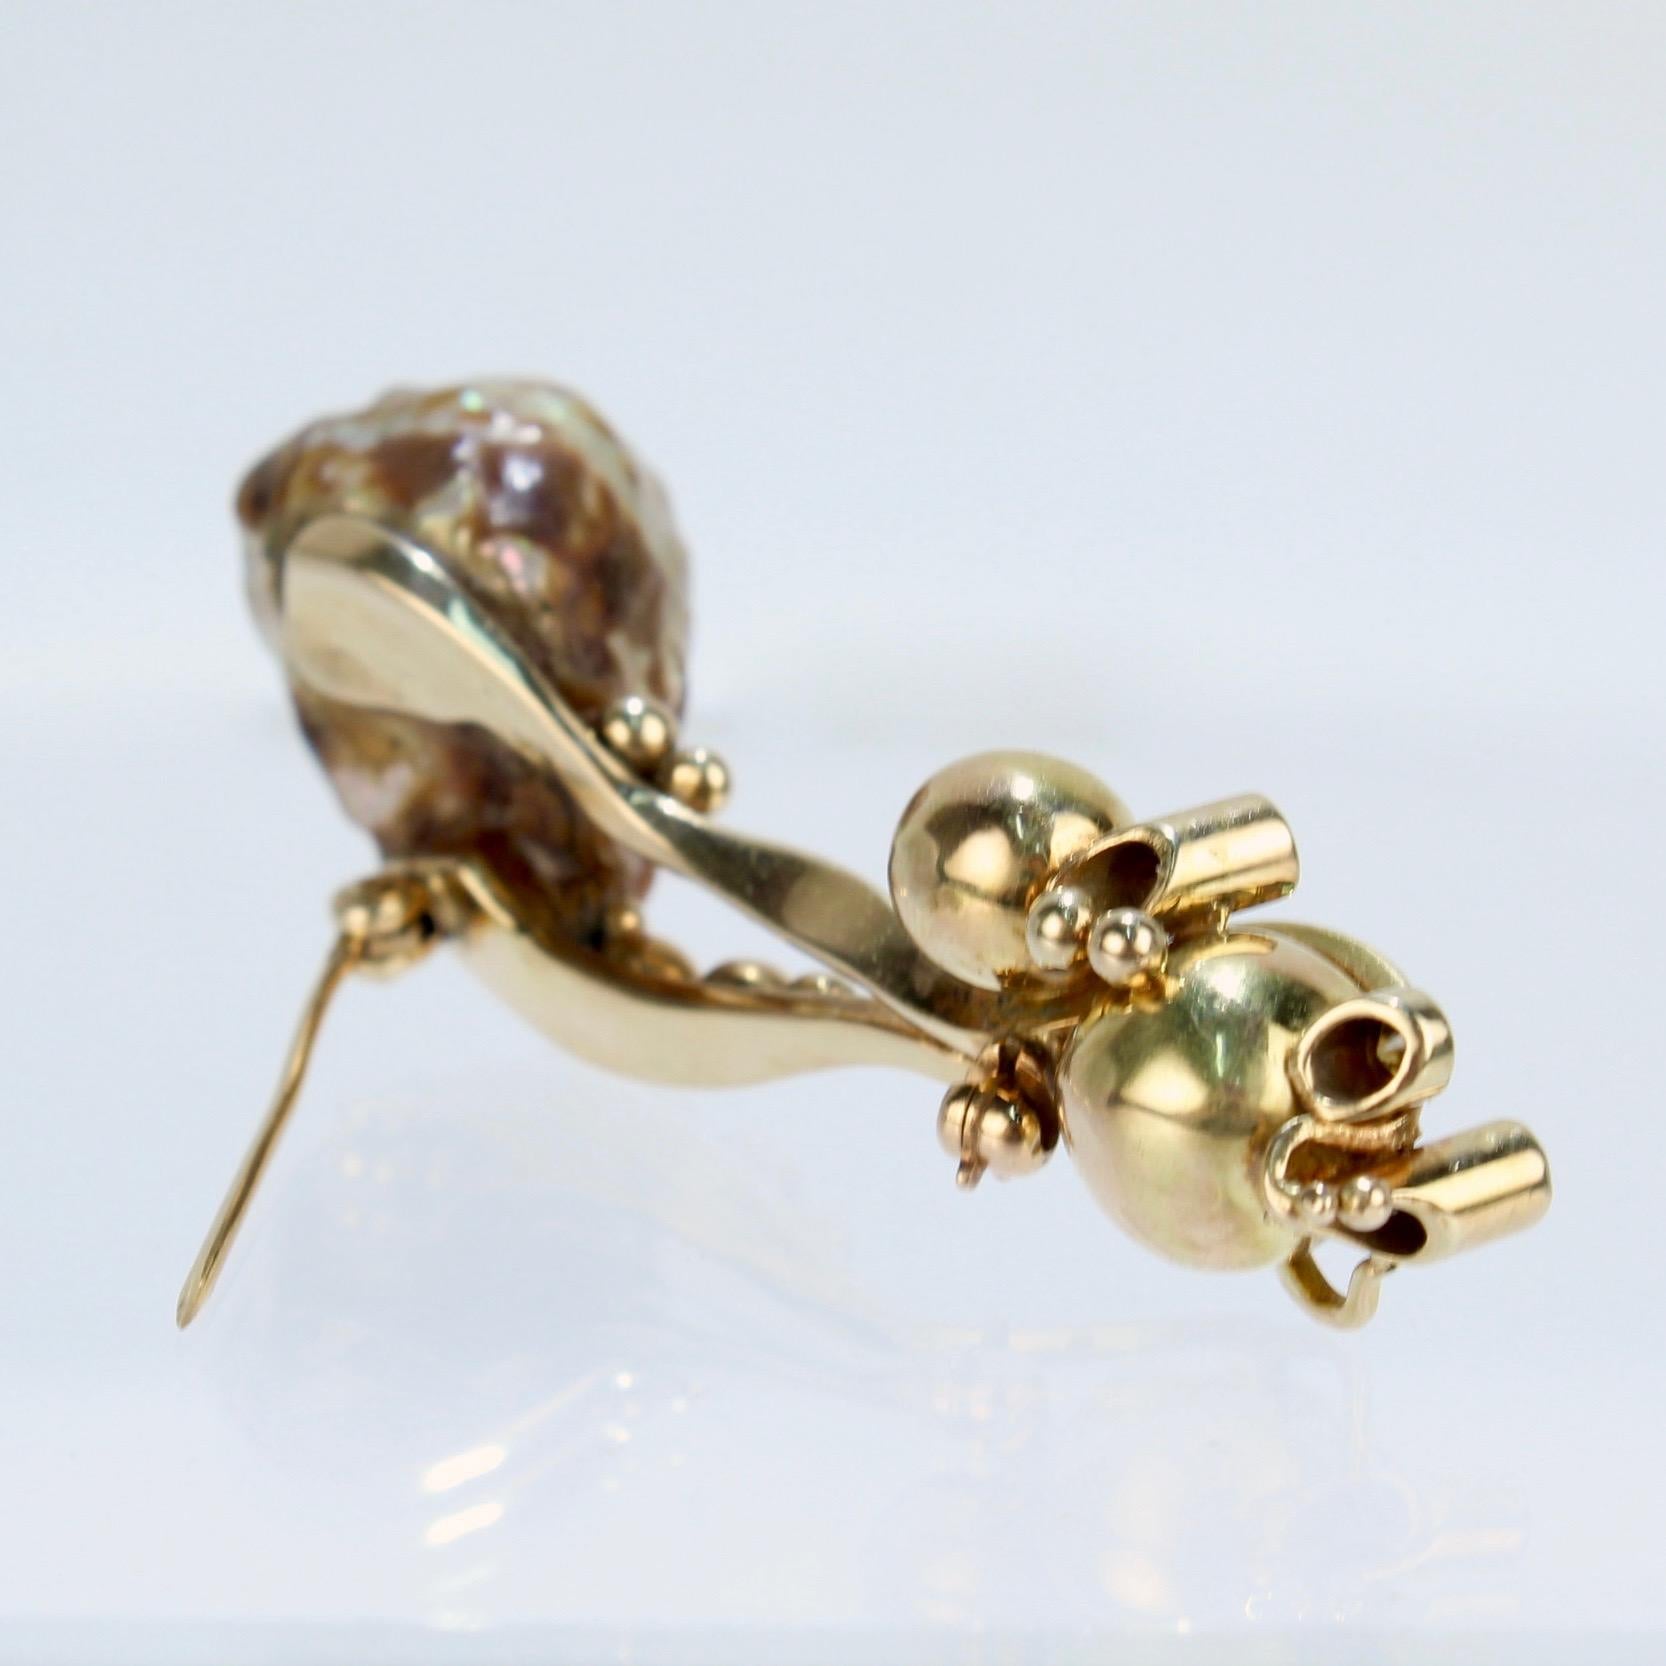 Modernist Biomorphic 14 Karat Gold Yellow Diamond & Baroque Pearl Brooch or Pin For Sale 6